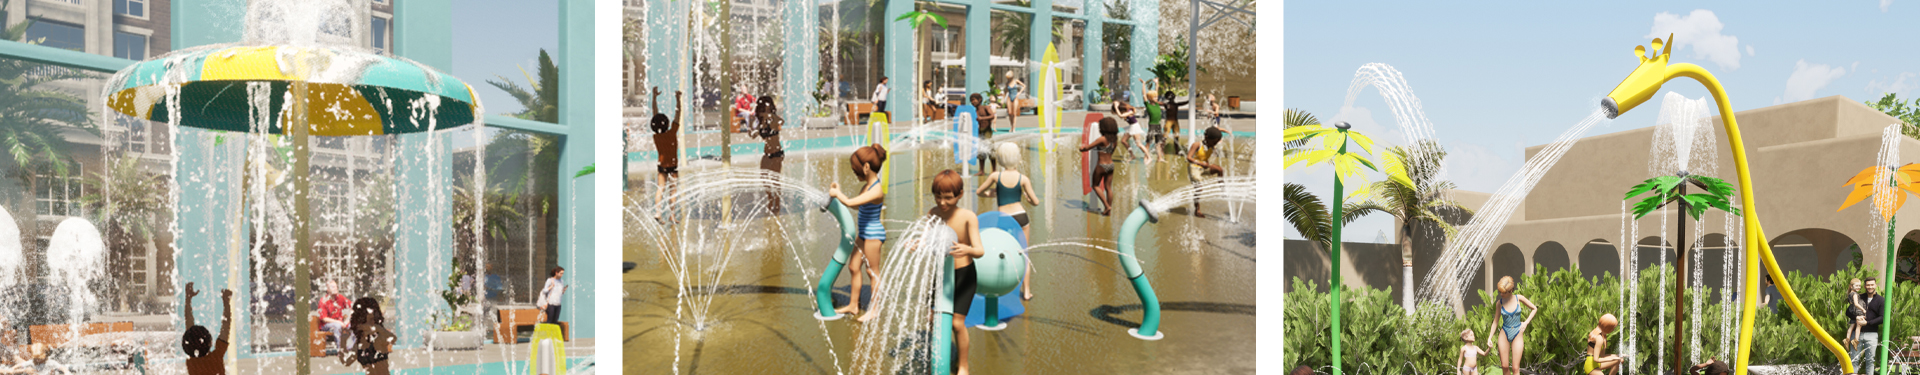 Waterplay Equipment - Mini Collections